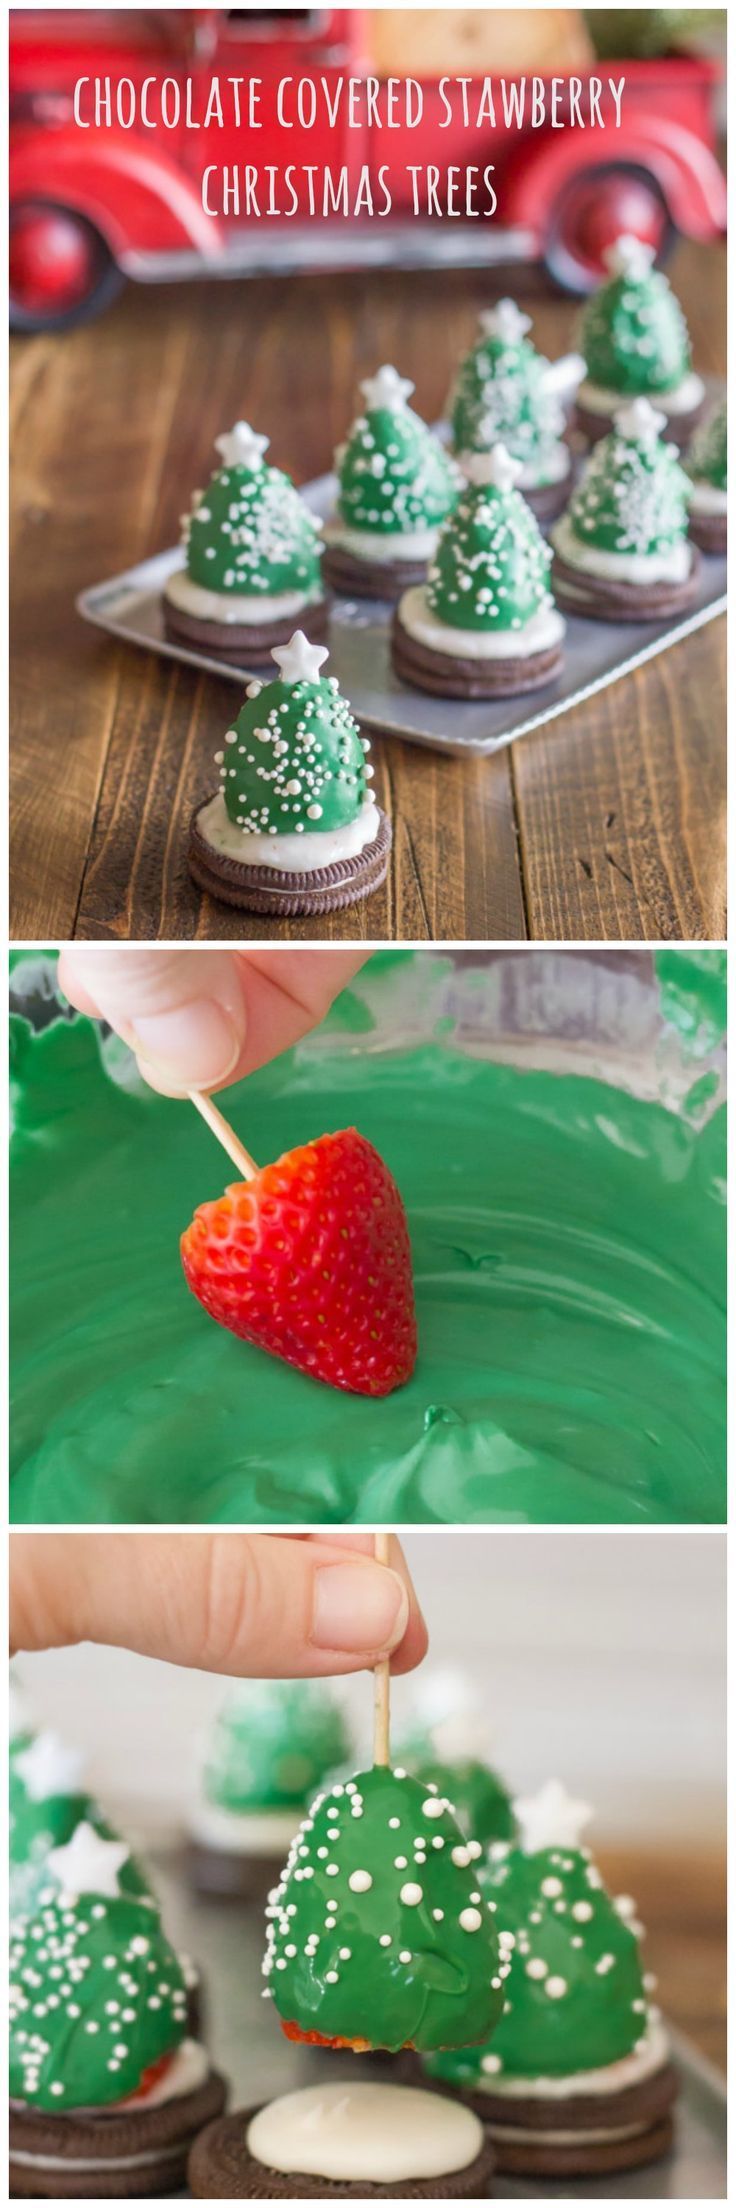 Chocolate-Covered Strawberry Christmas Trees ~ a fun, kid-friendly project for the holidays